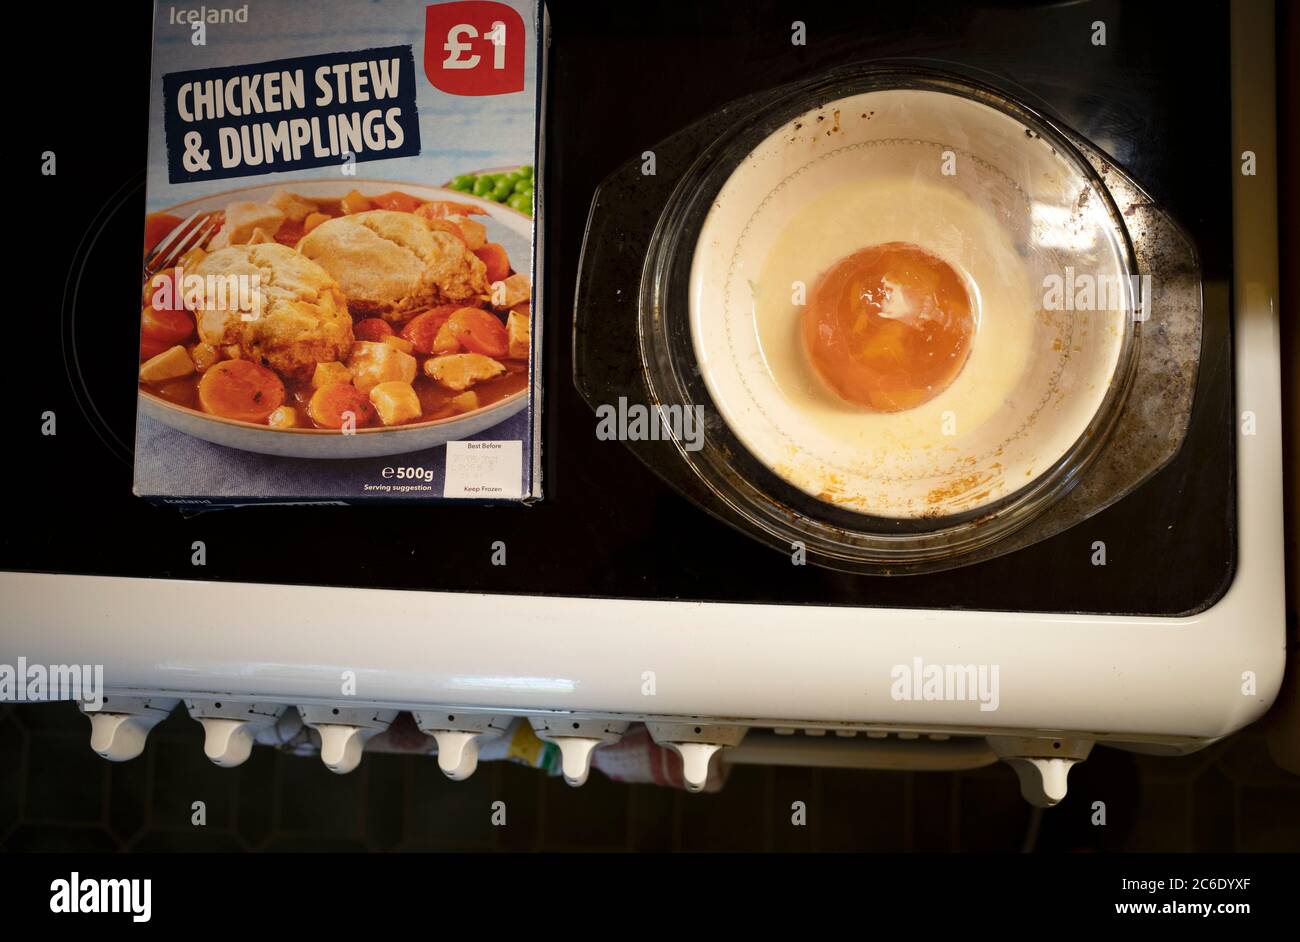 Iceland frozen chicken and dumplings ready meal Stock Photo